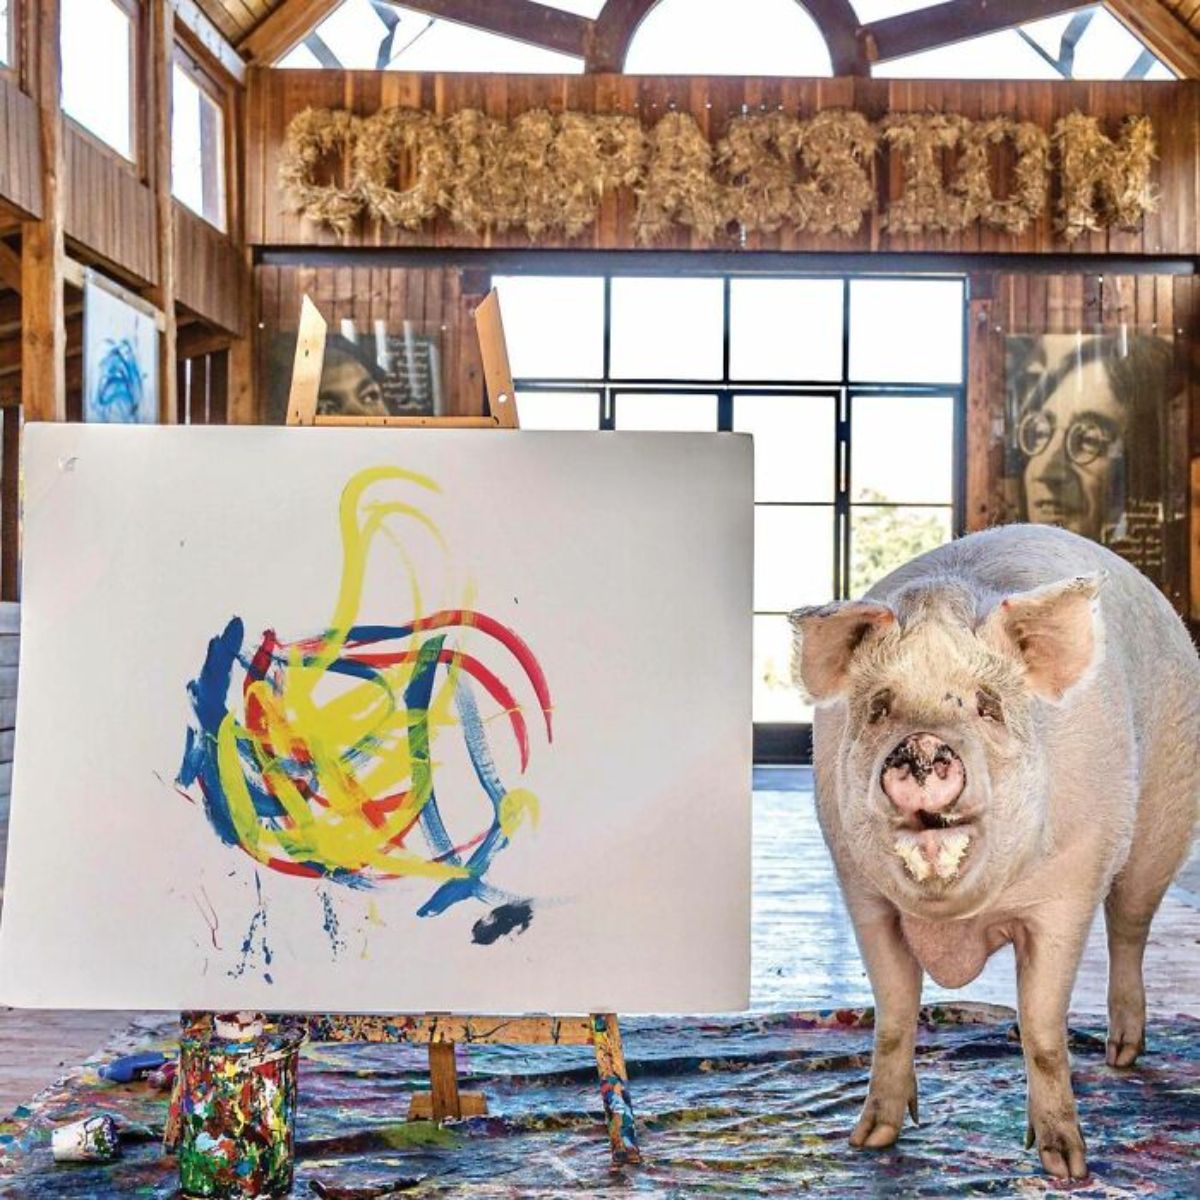 white pig standing on a paint-splattered material next to a white canvas with blue yellow and red paint inside a wooden room